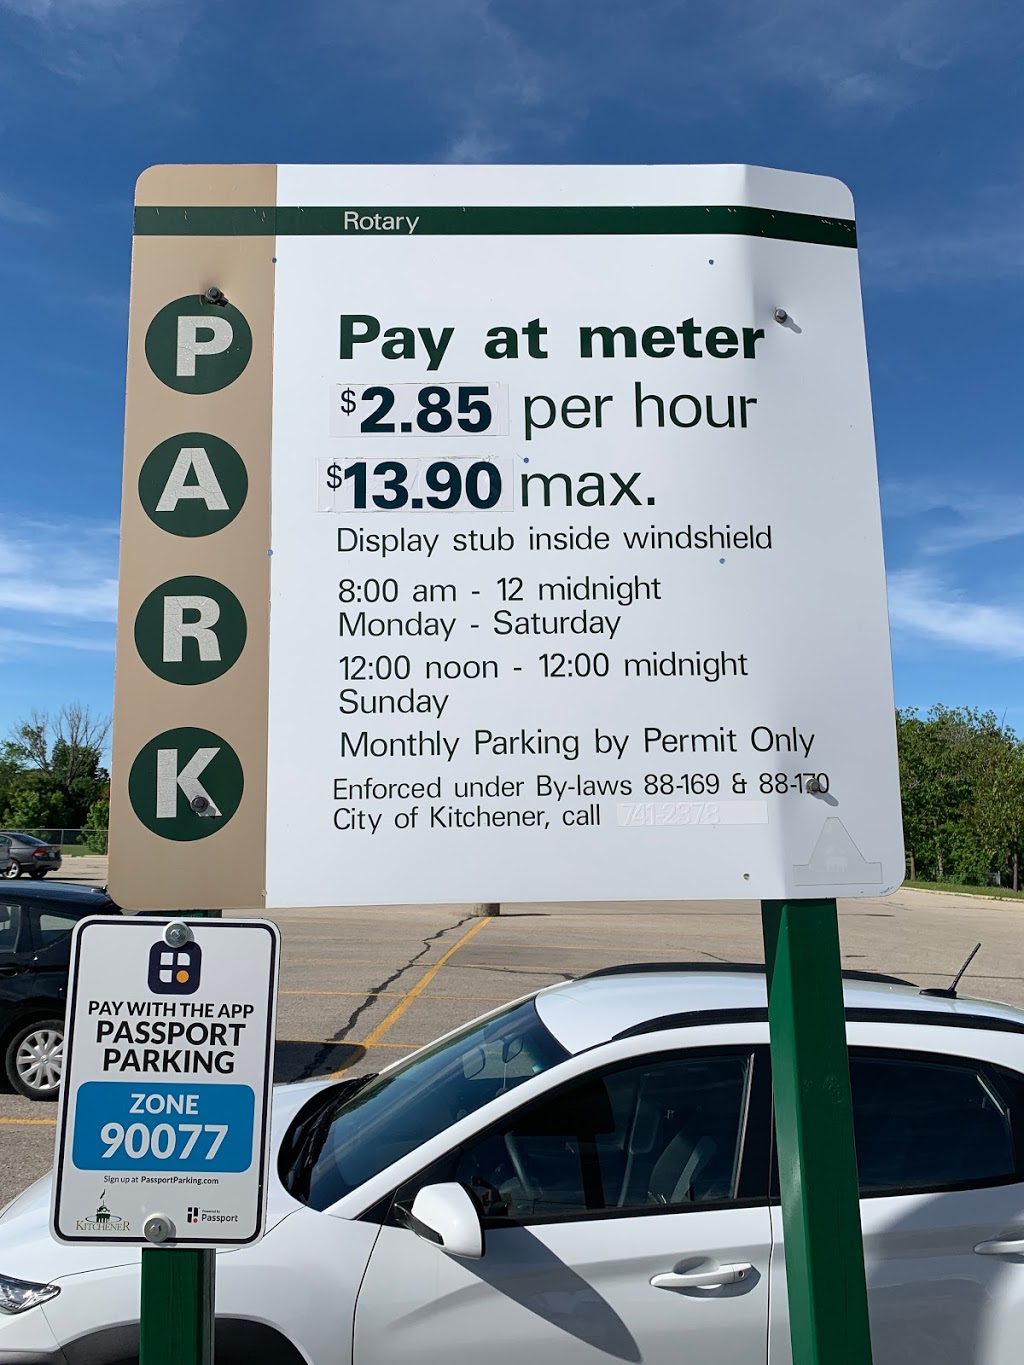 Rotary Parking | parking | 828 King St W, Kitchener, ON N2G 1E8, Canada | 51974122007151 OR +1 519-741-2200 ext. 7151